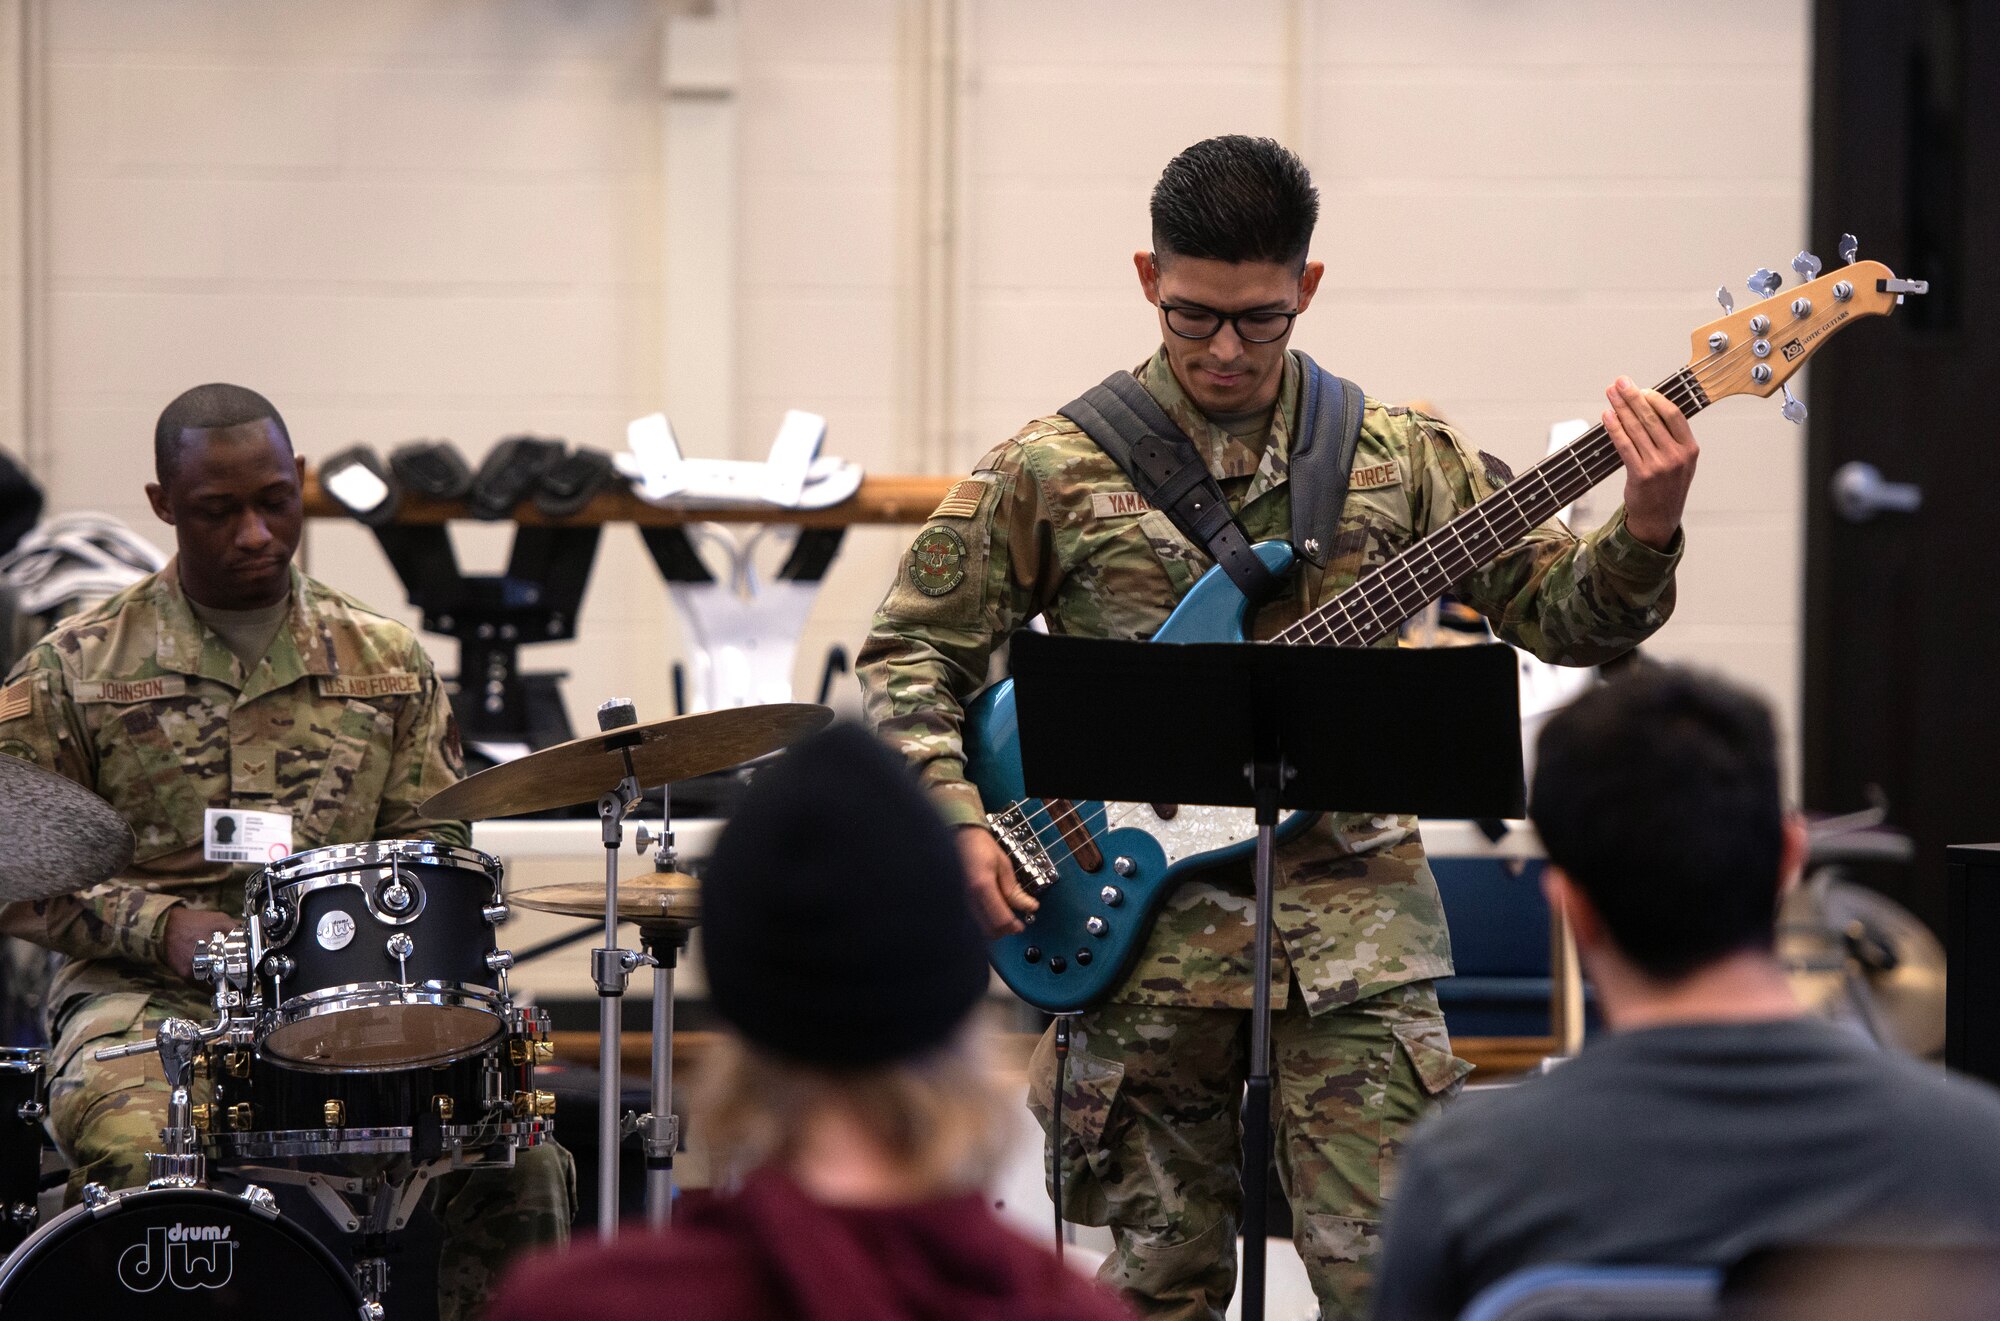 Band members play instruments for high school students